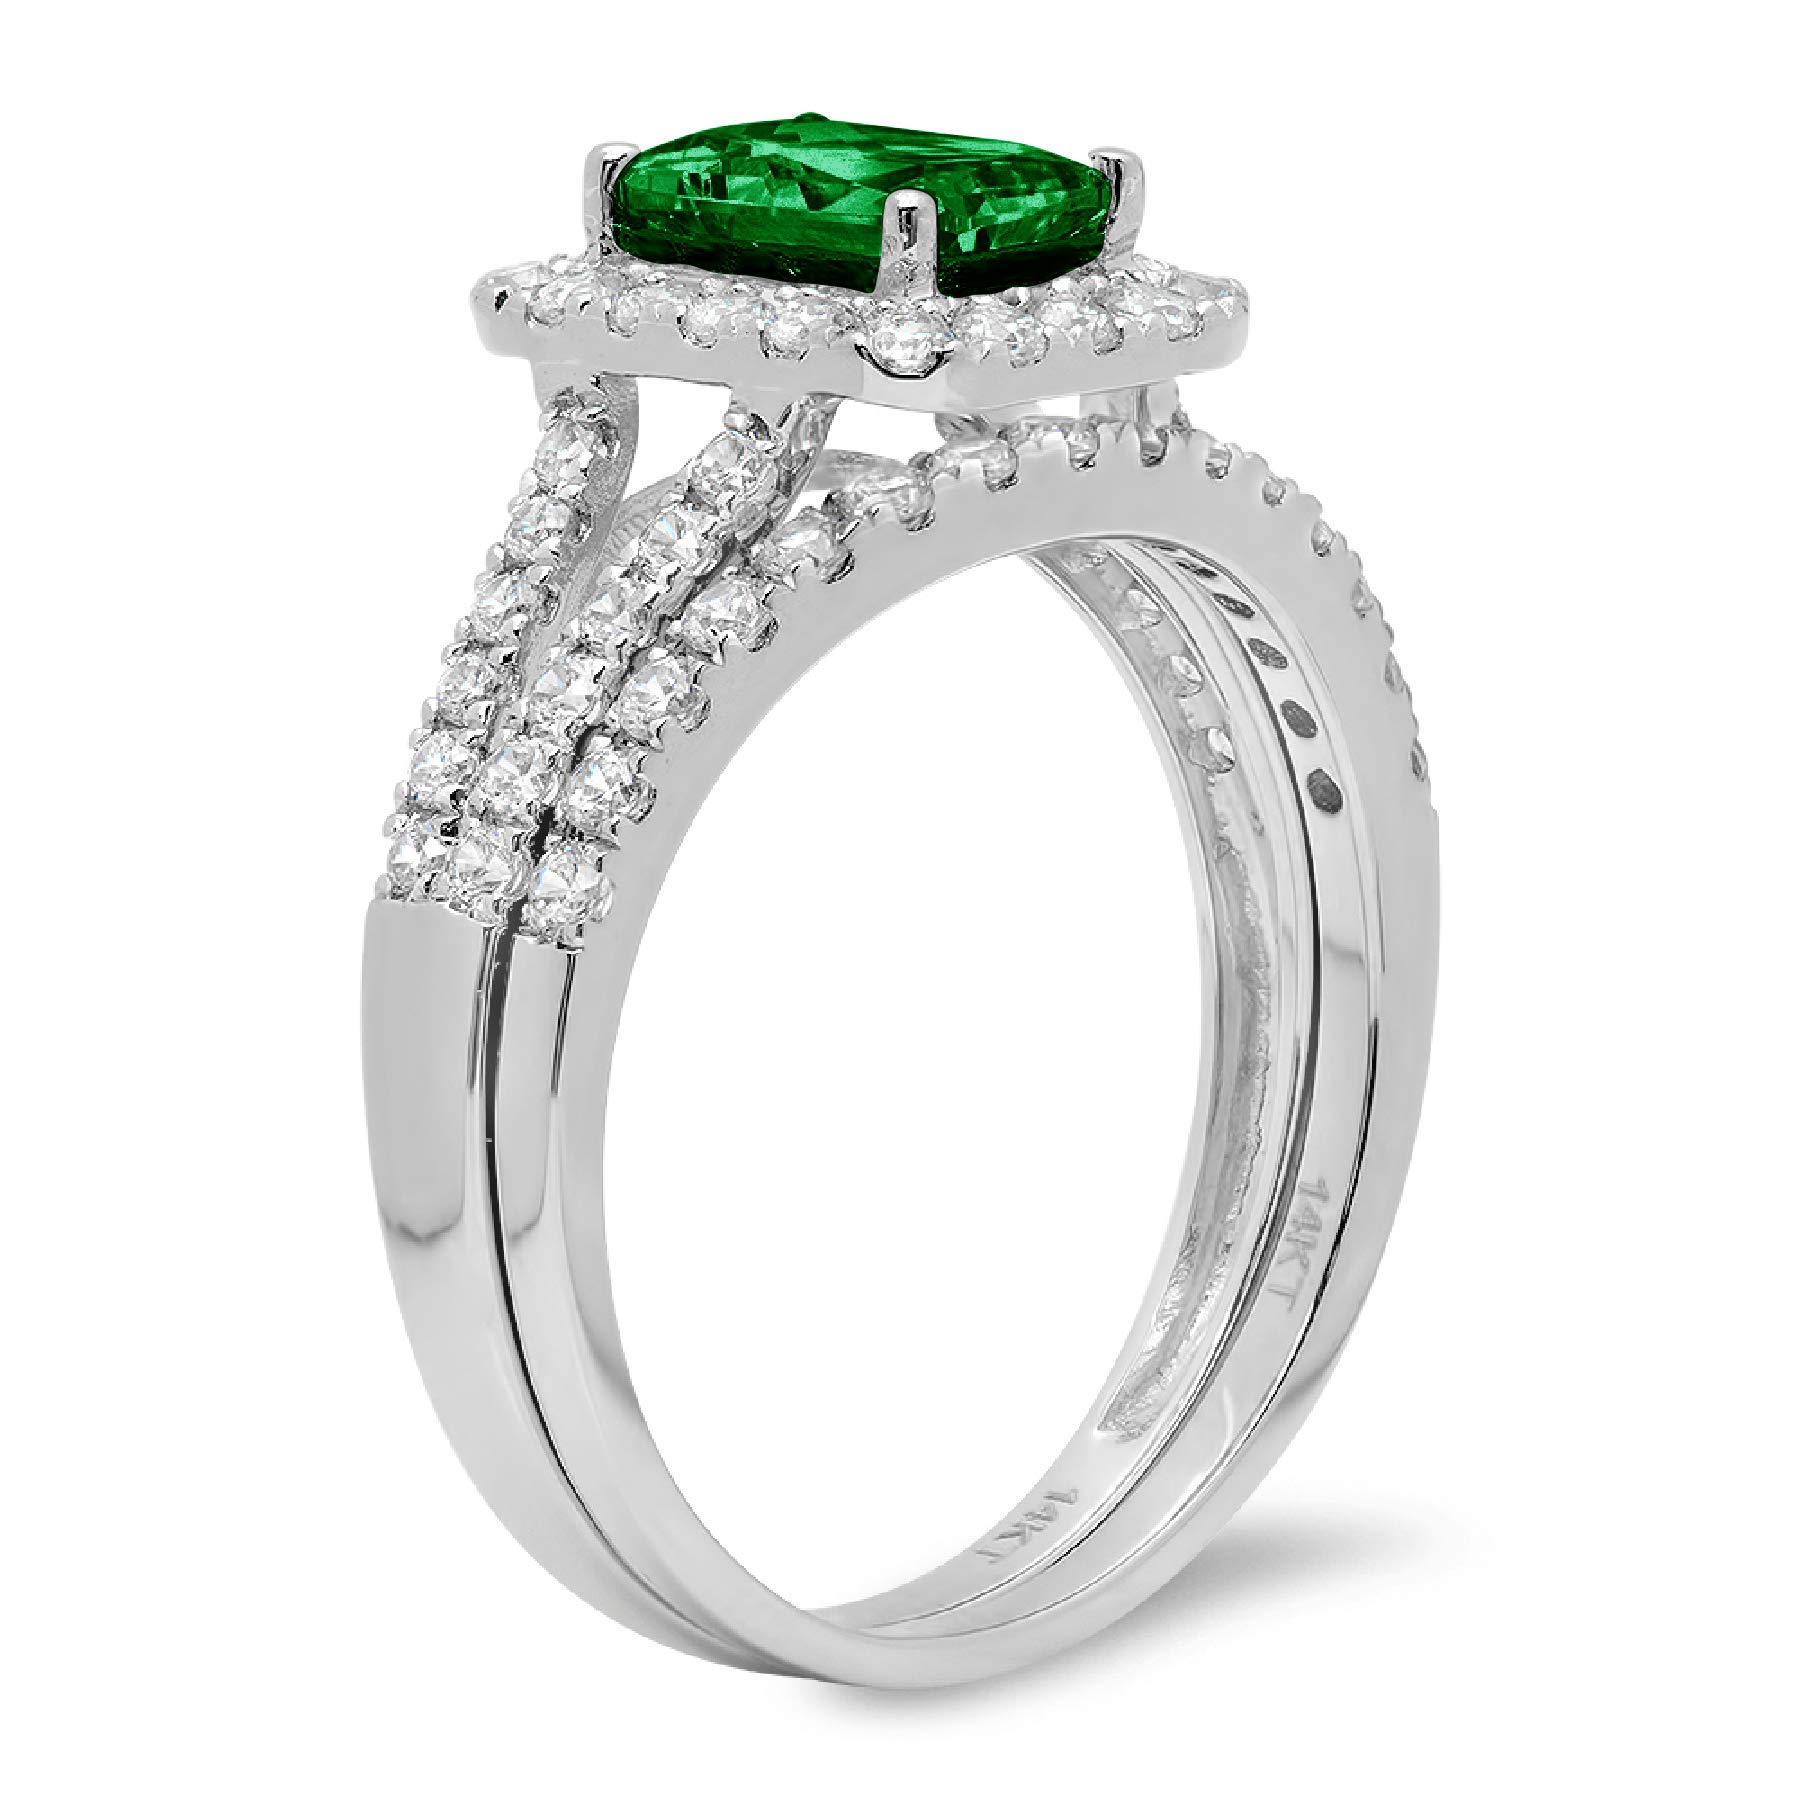 1.54ct Emerald Round Cut Pave Halo Split Shank Solitaire Accent VVS1 Ideal Flawless Simulated CZ Green Emerald Engagement Promise Designer Anniversary Wedding Bridal ring band set 14k White Gold